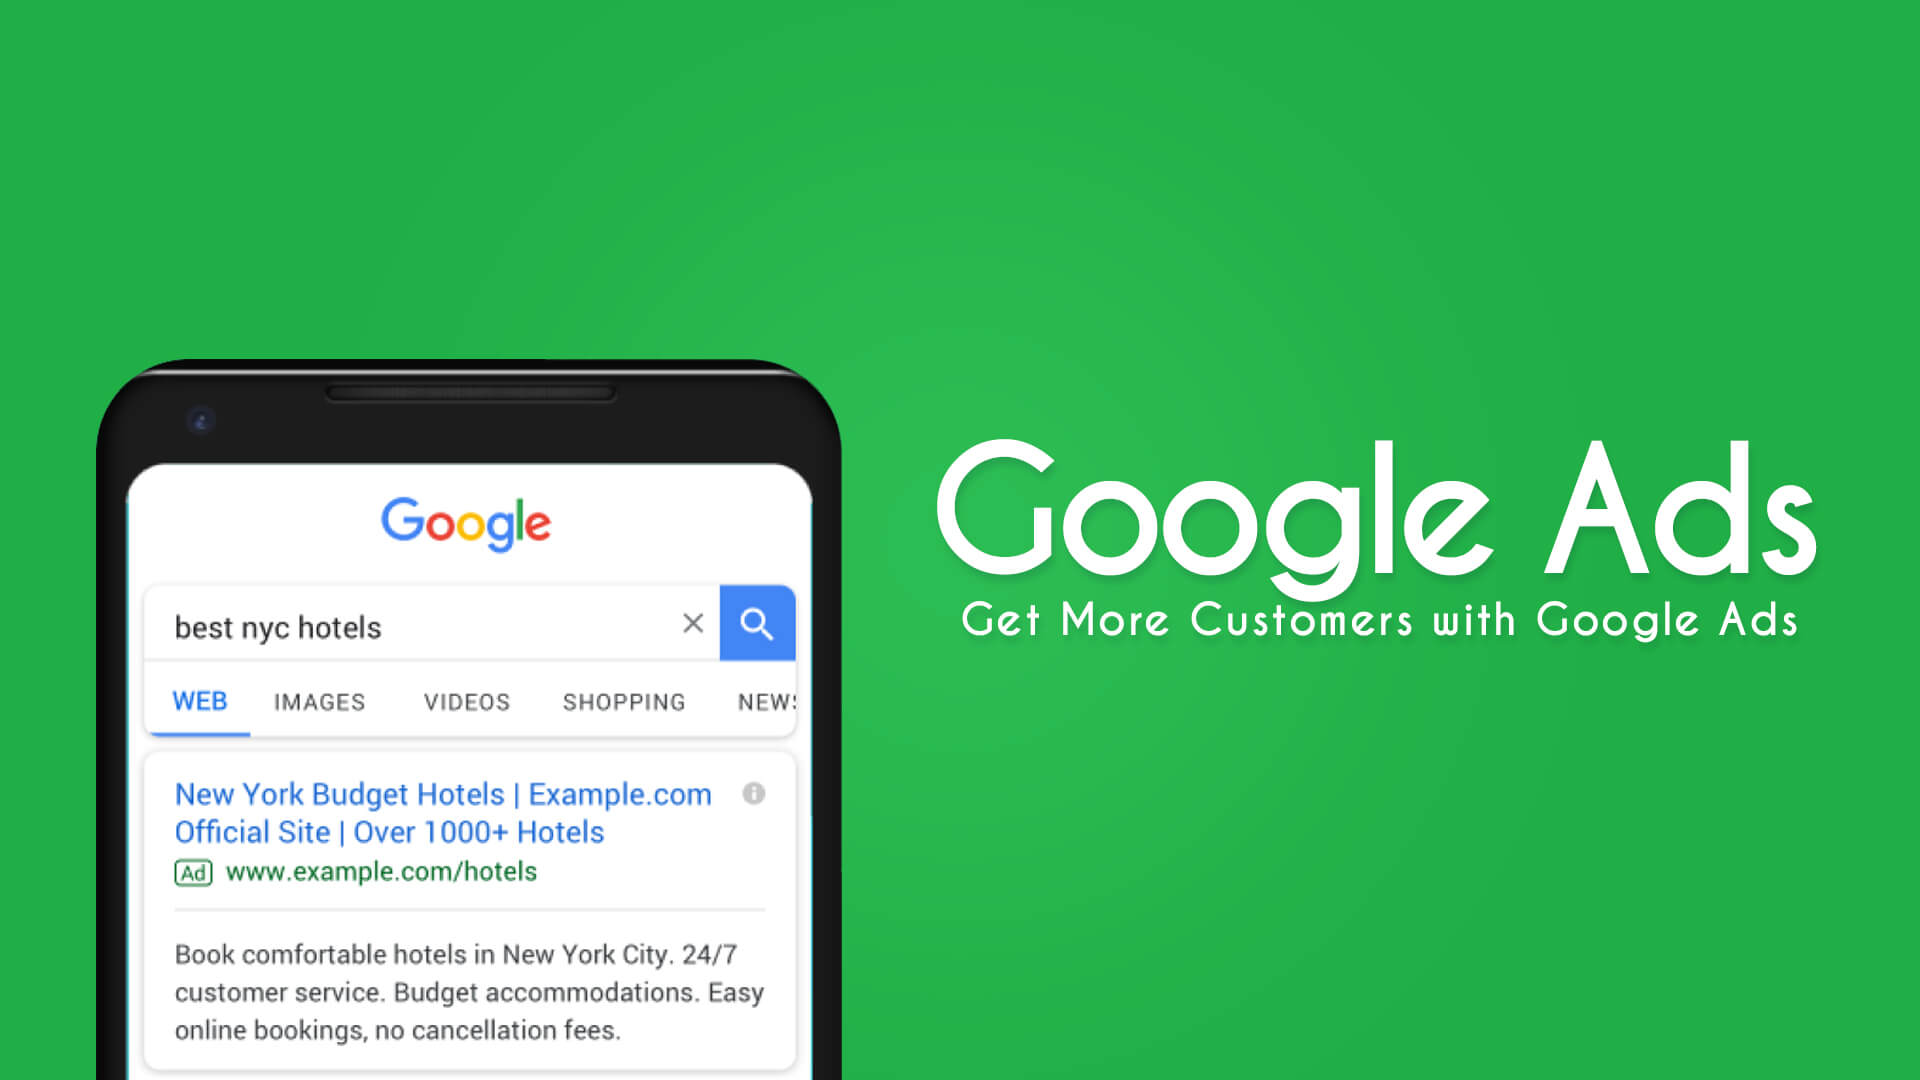 Get More Customers with Google Ads